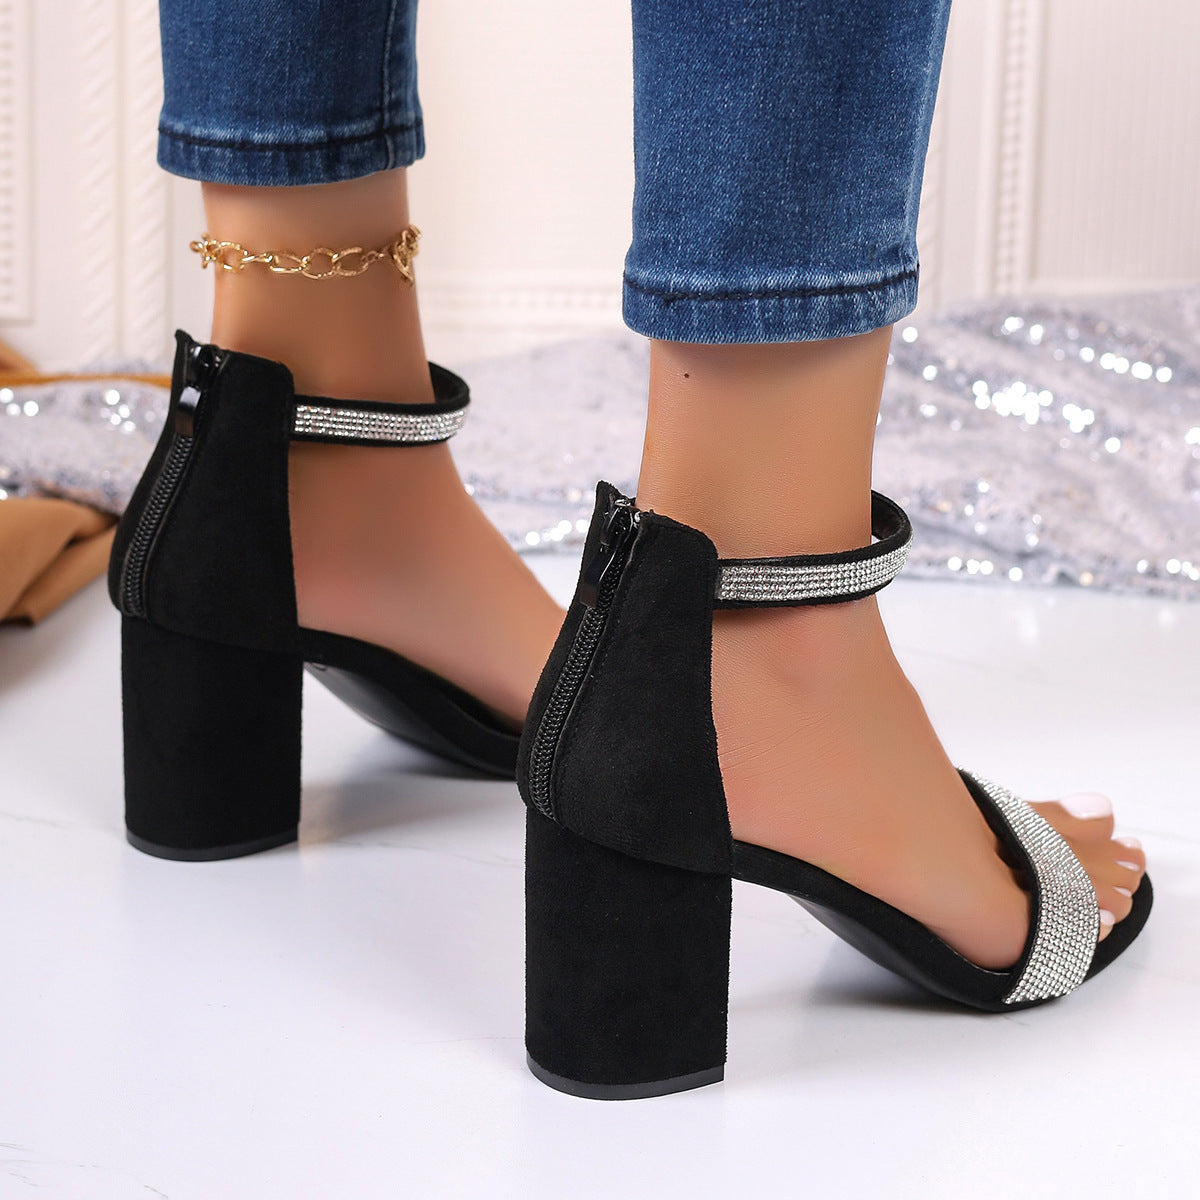 Rhinestone High Heel Sandals Summer Chunky Square Heel Sandals Open Toe Strappy Shoes